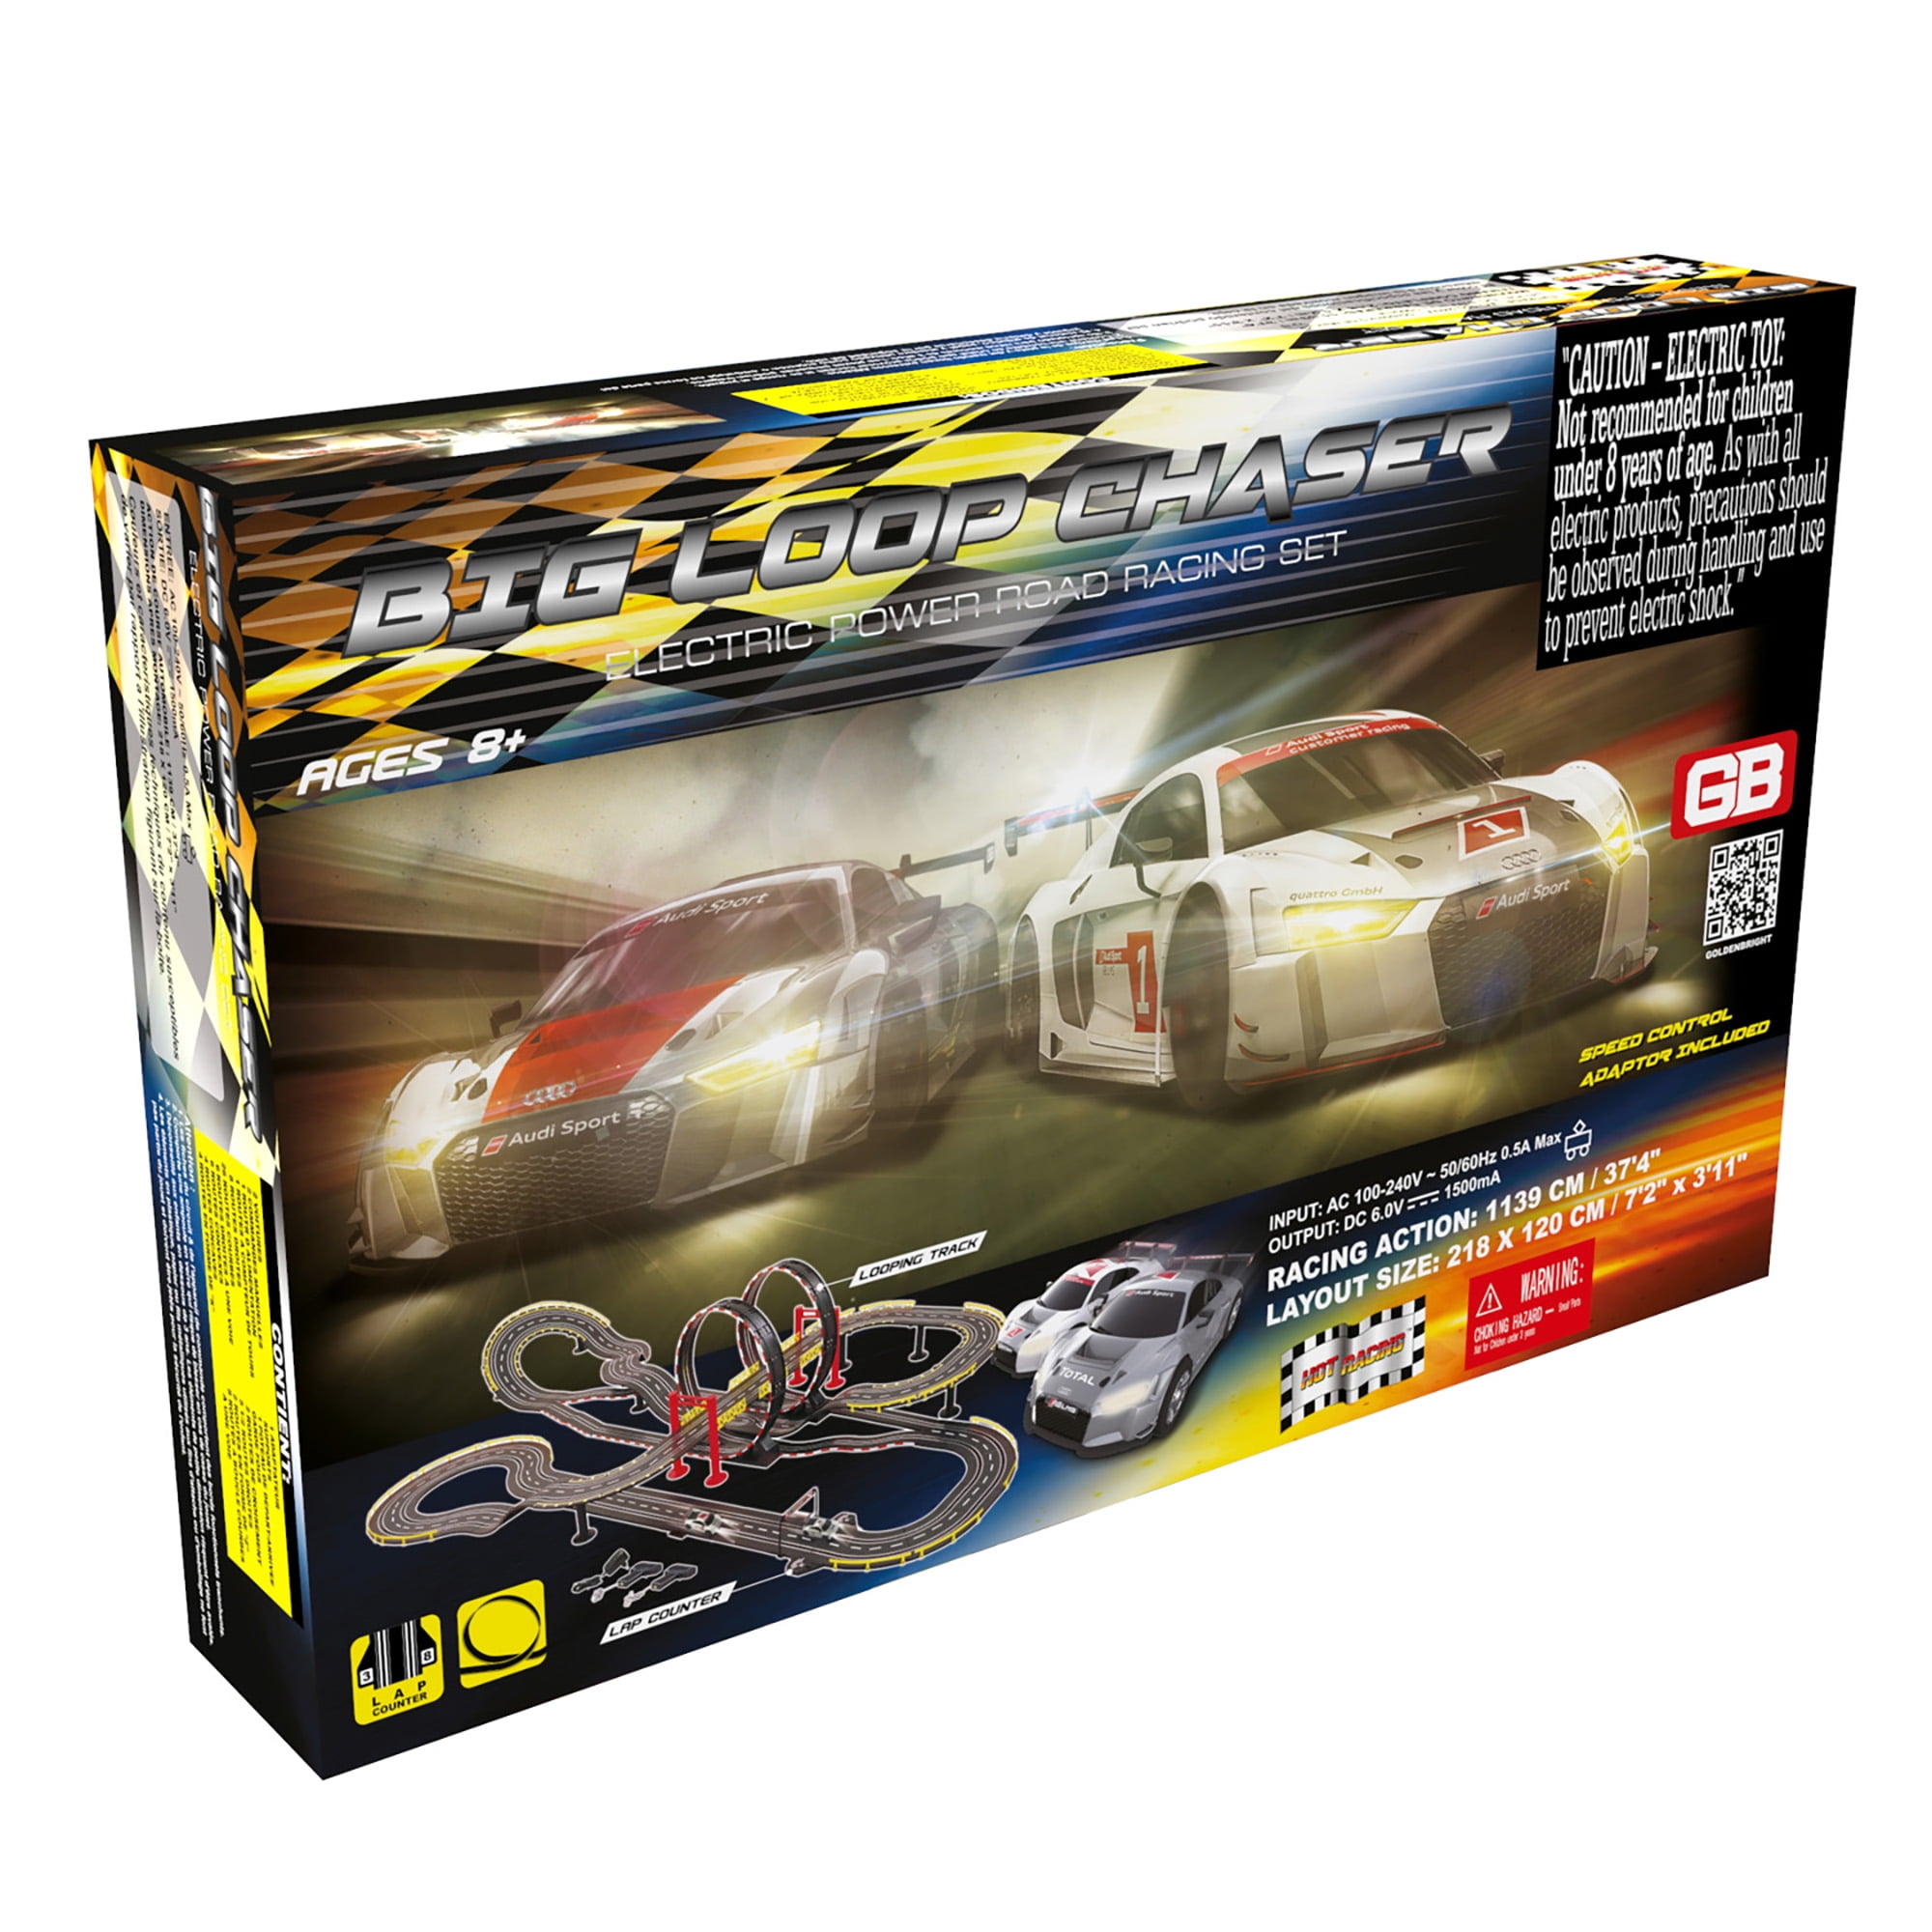 Golden Bright Big Loop Chaser Road Racing Slot Car Set Electric Powered 8-11 NEW 